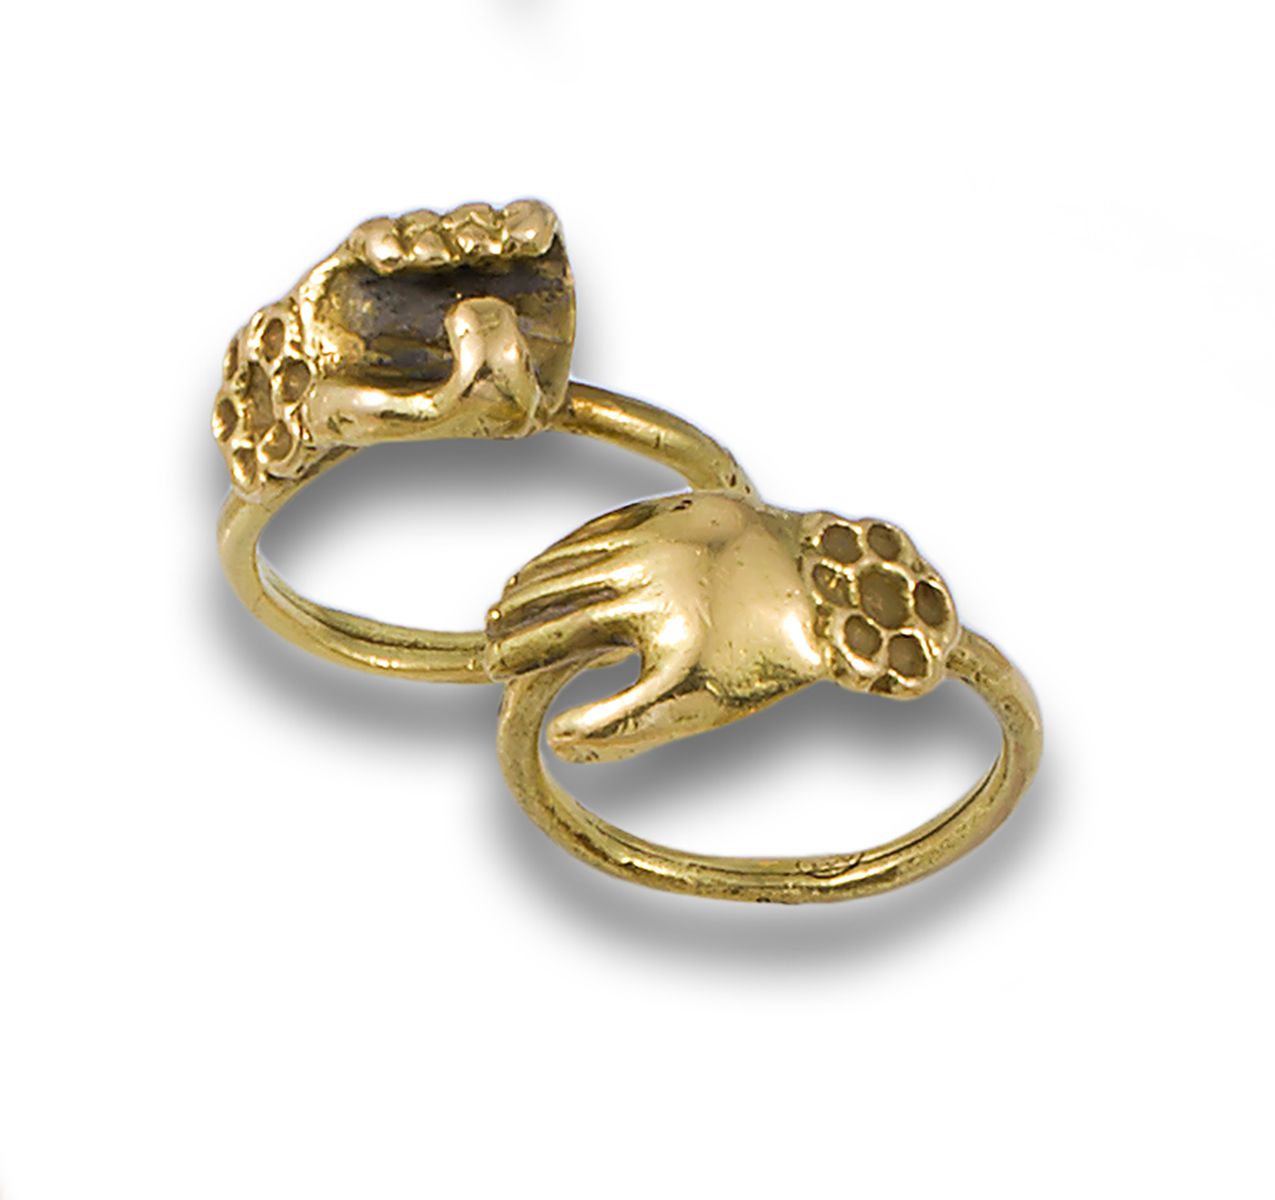 TWO YELLOW GOLD HAND RINGS Set of two 18kt yellow gold handring rings ....